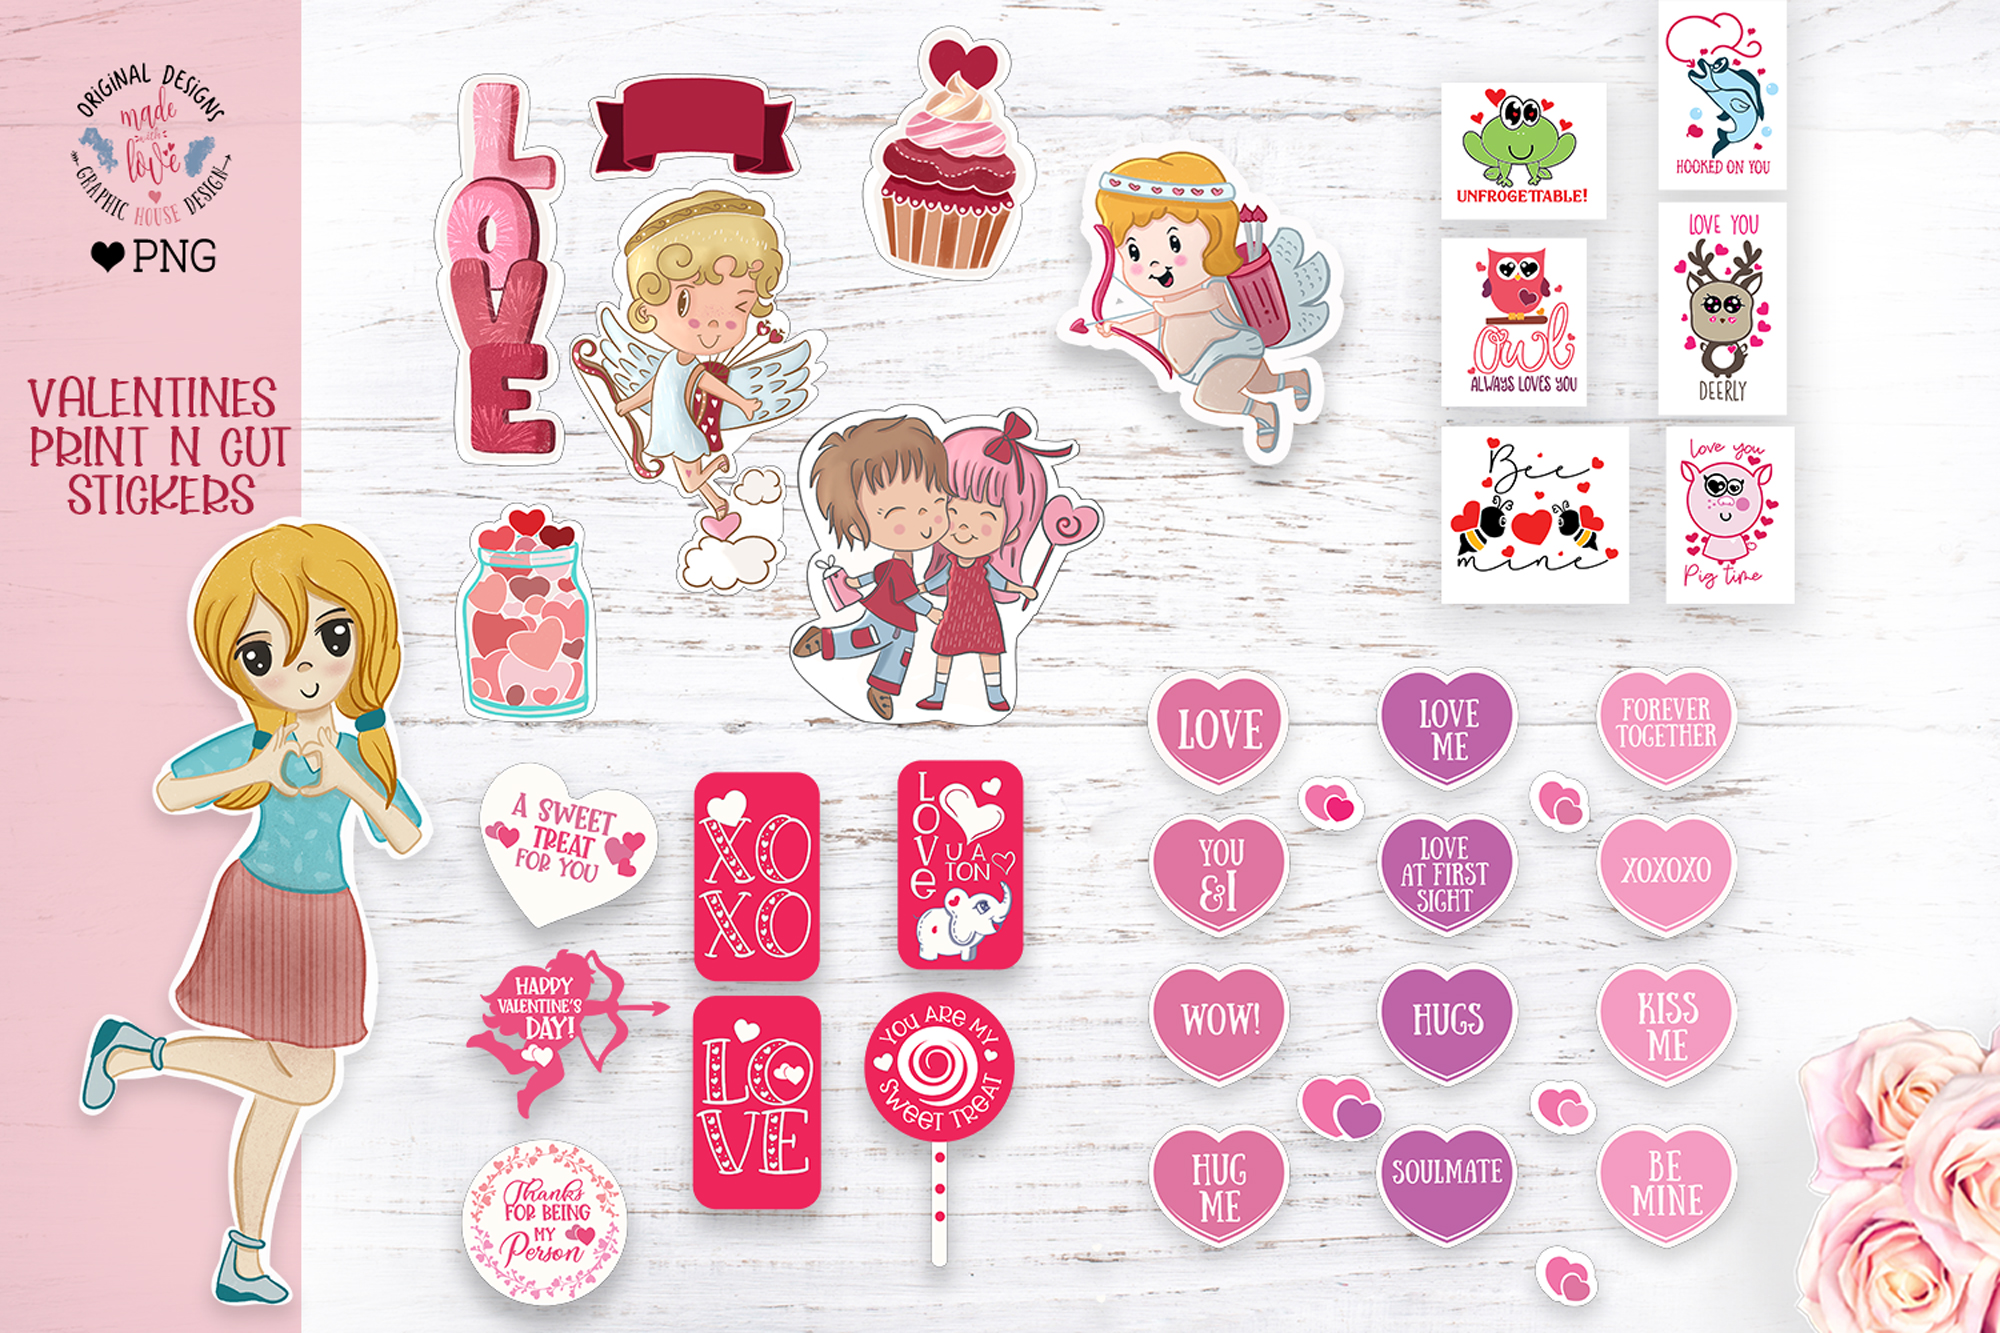 New Cute and Funny Valentine’s Printable Stickers